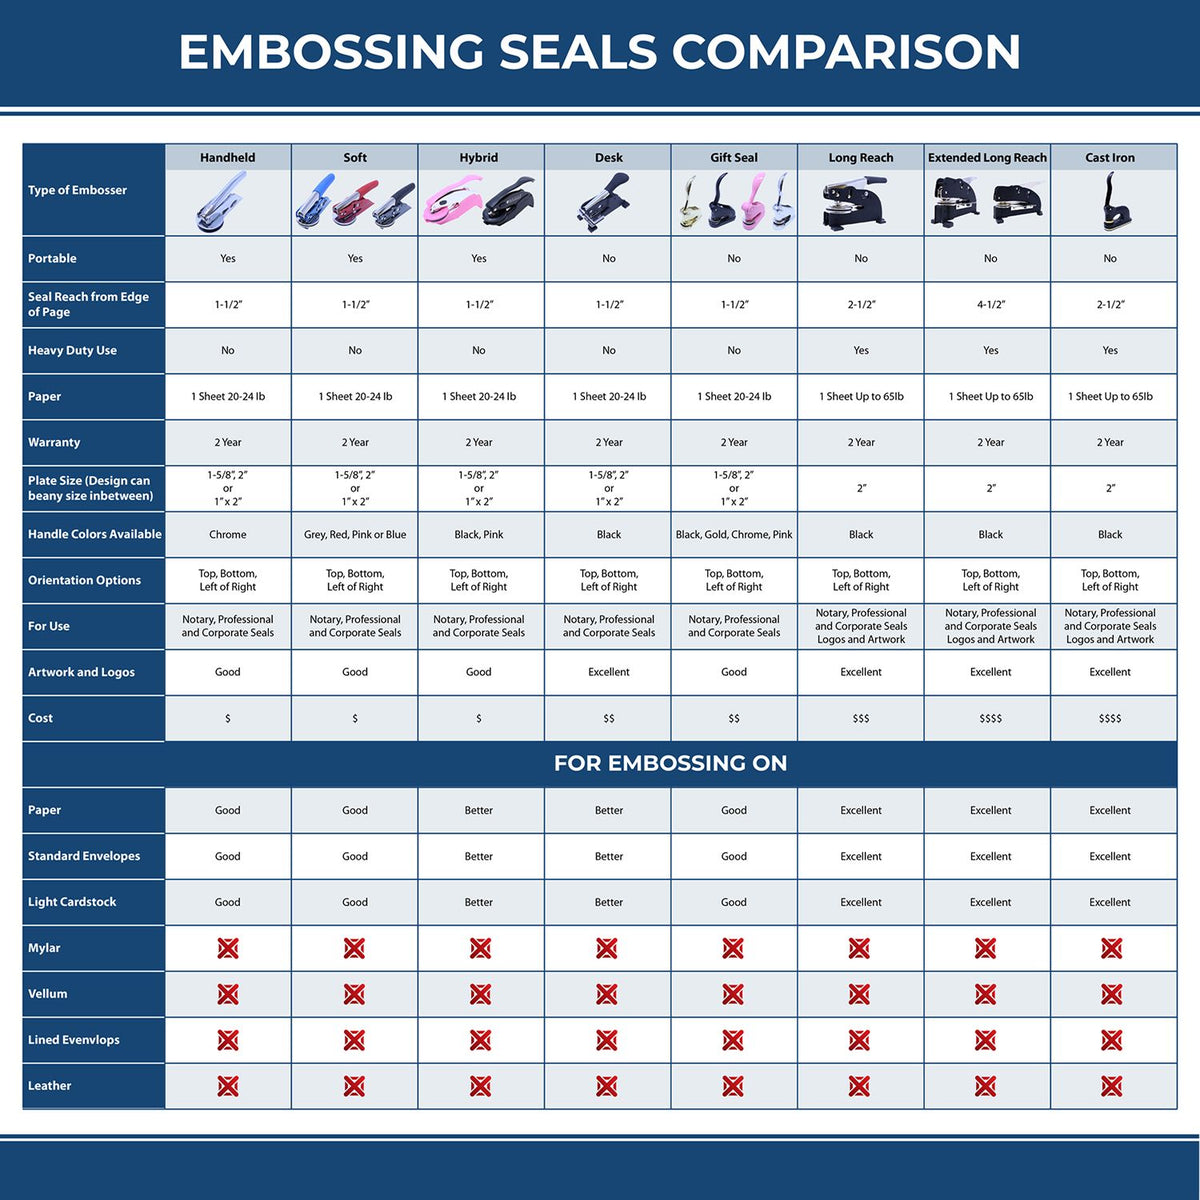 A comparison chart for the different types of mount models available for the Hybrid Wisconsin Geologist Seal